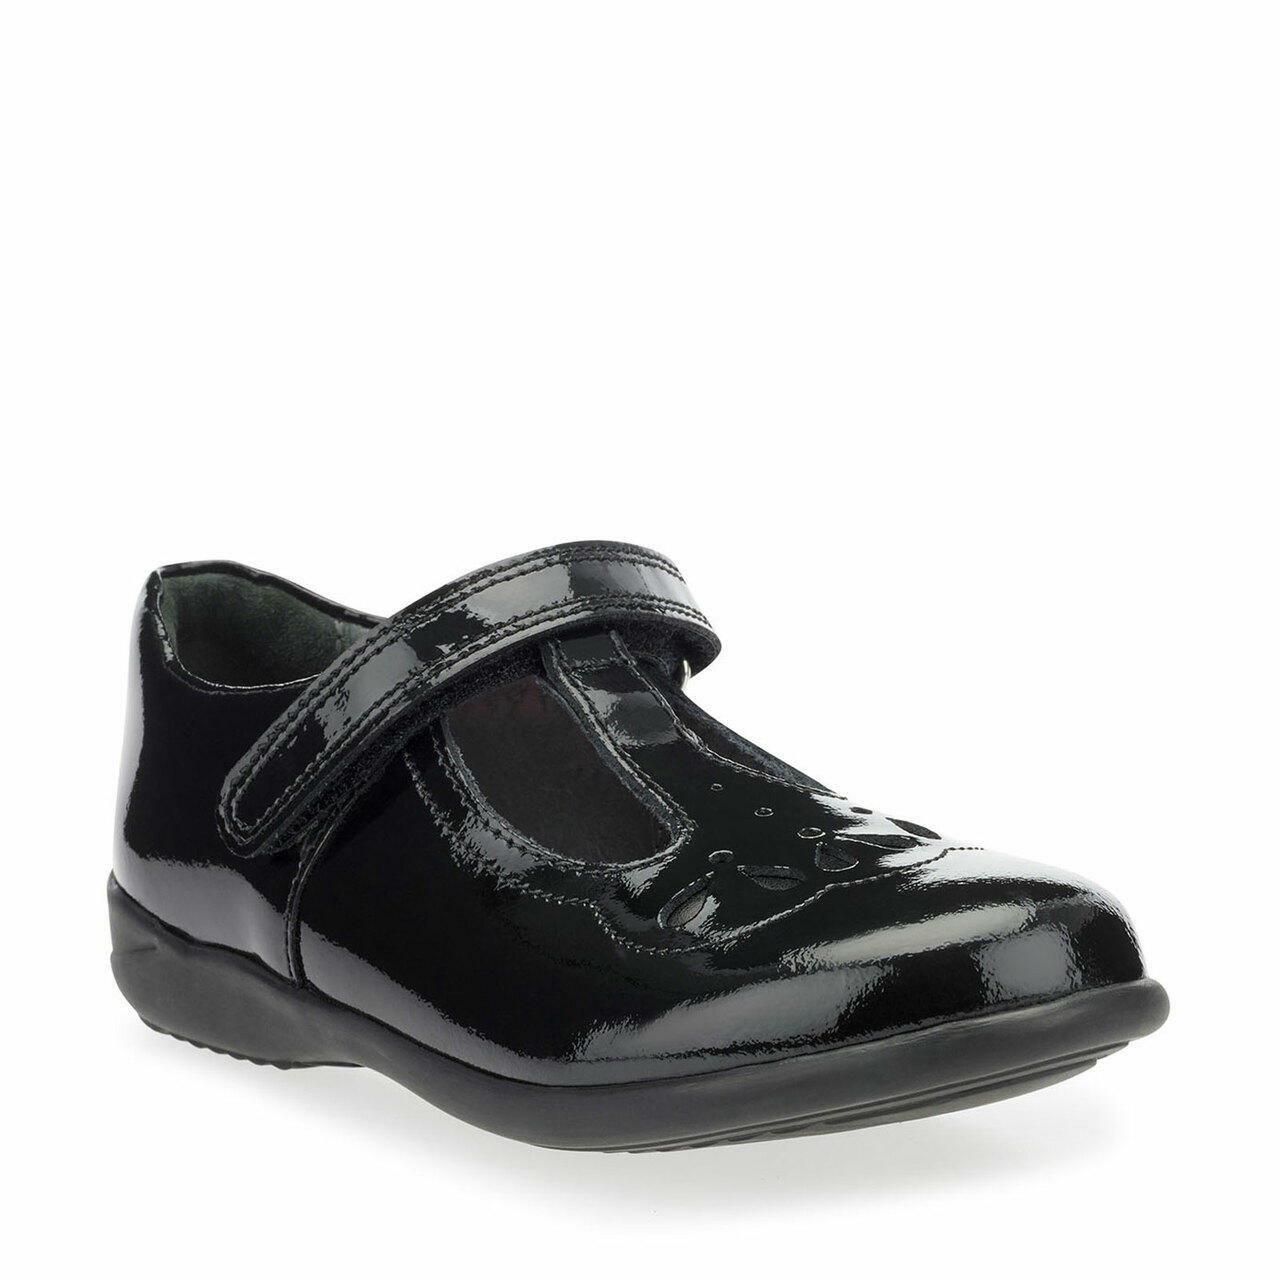 A girls school shoe by Start Rite, style Poppy, in black patent with velcro fastening. Angled view.